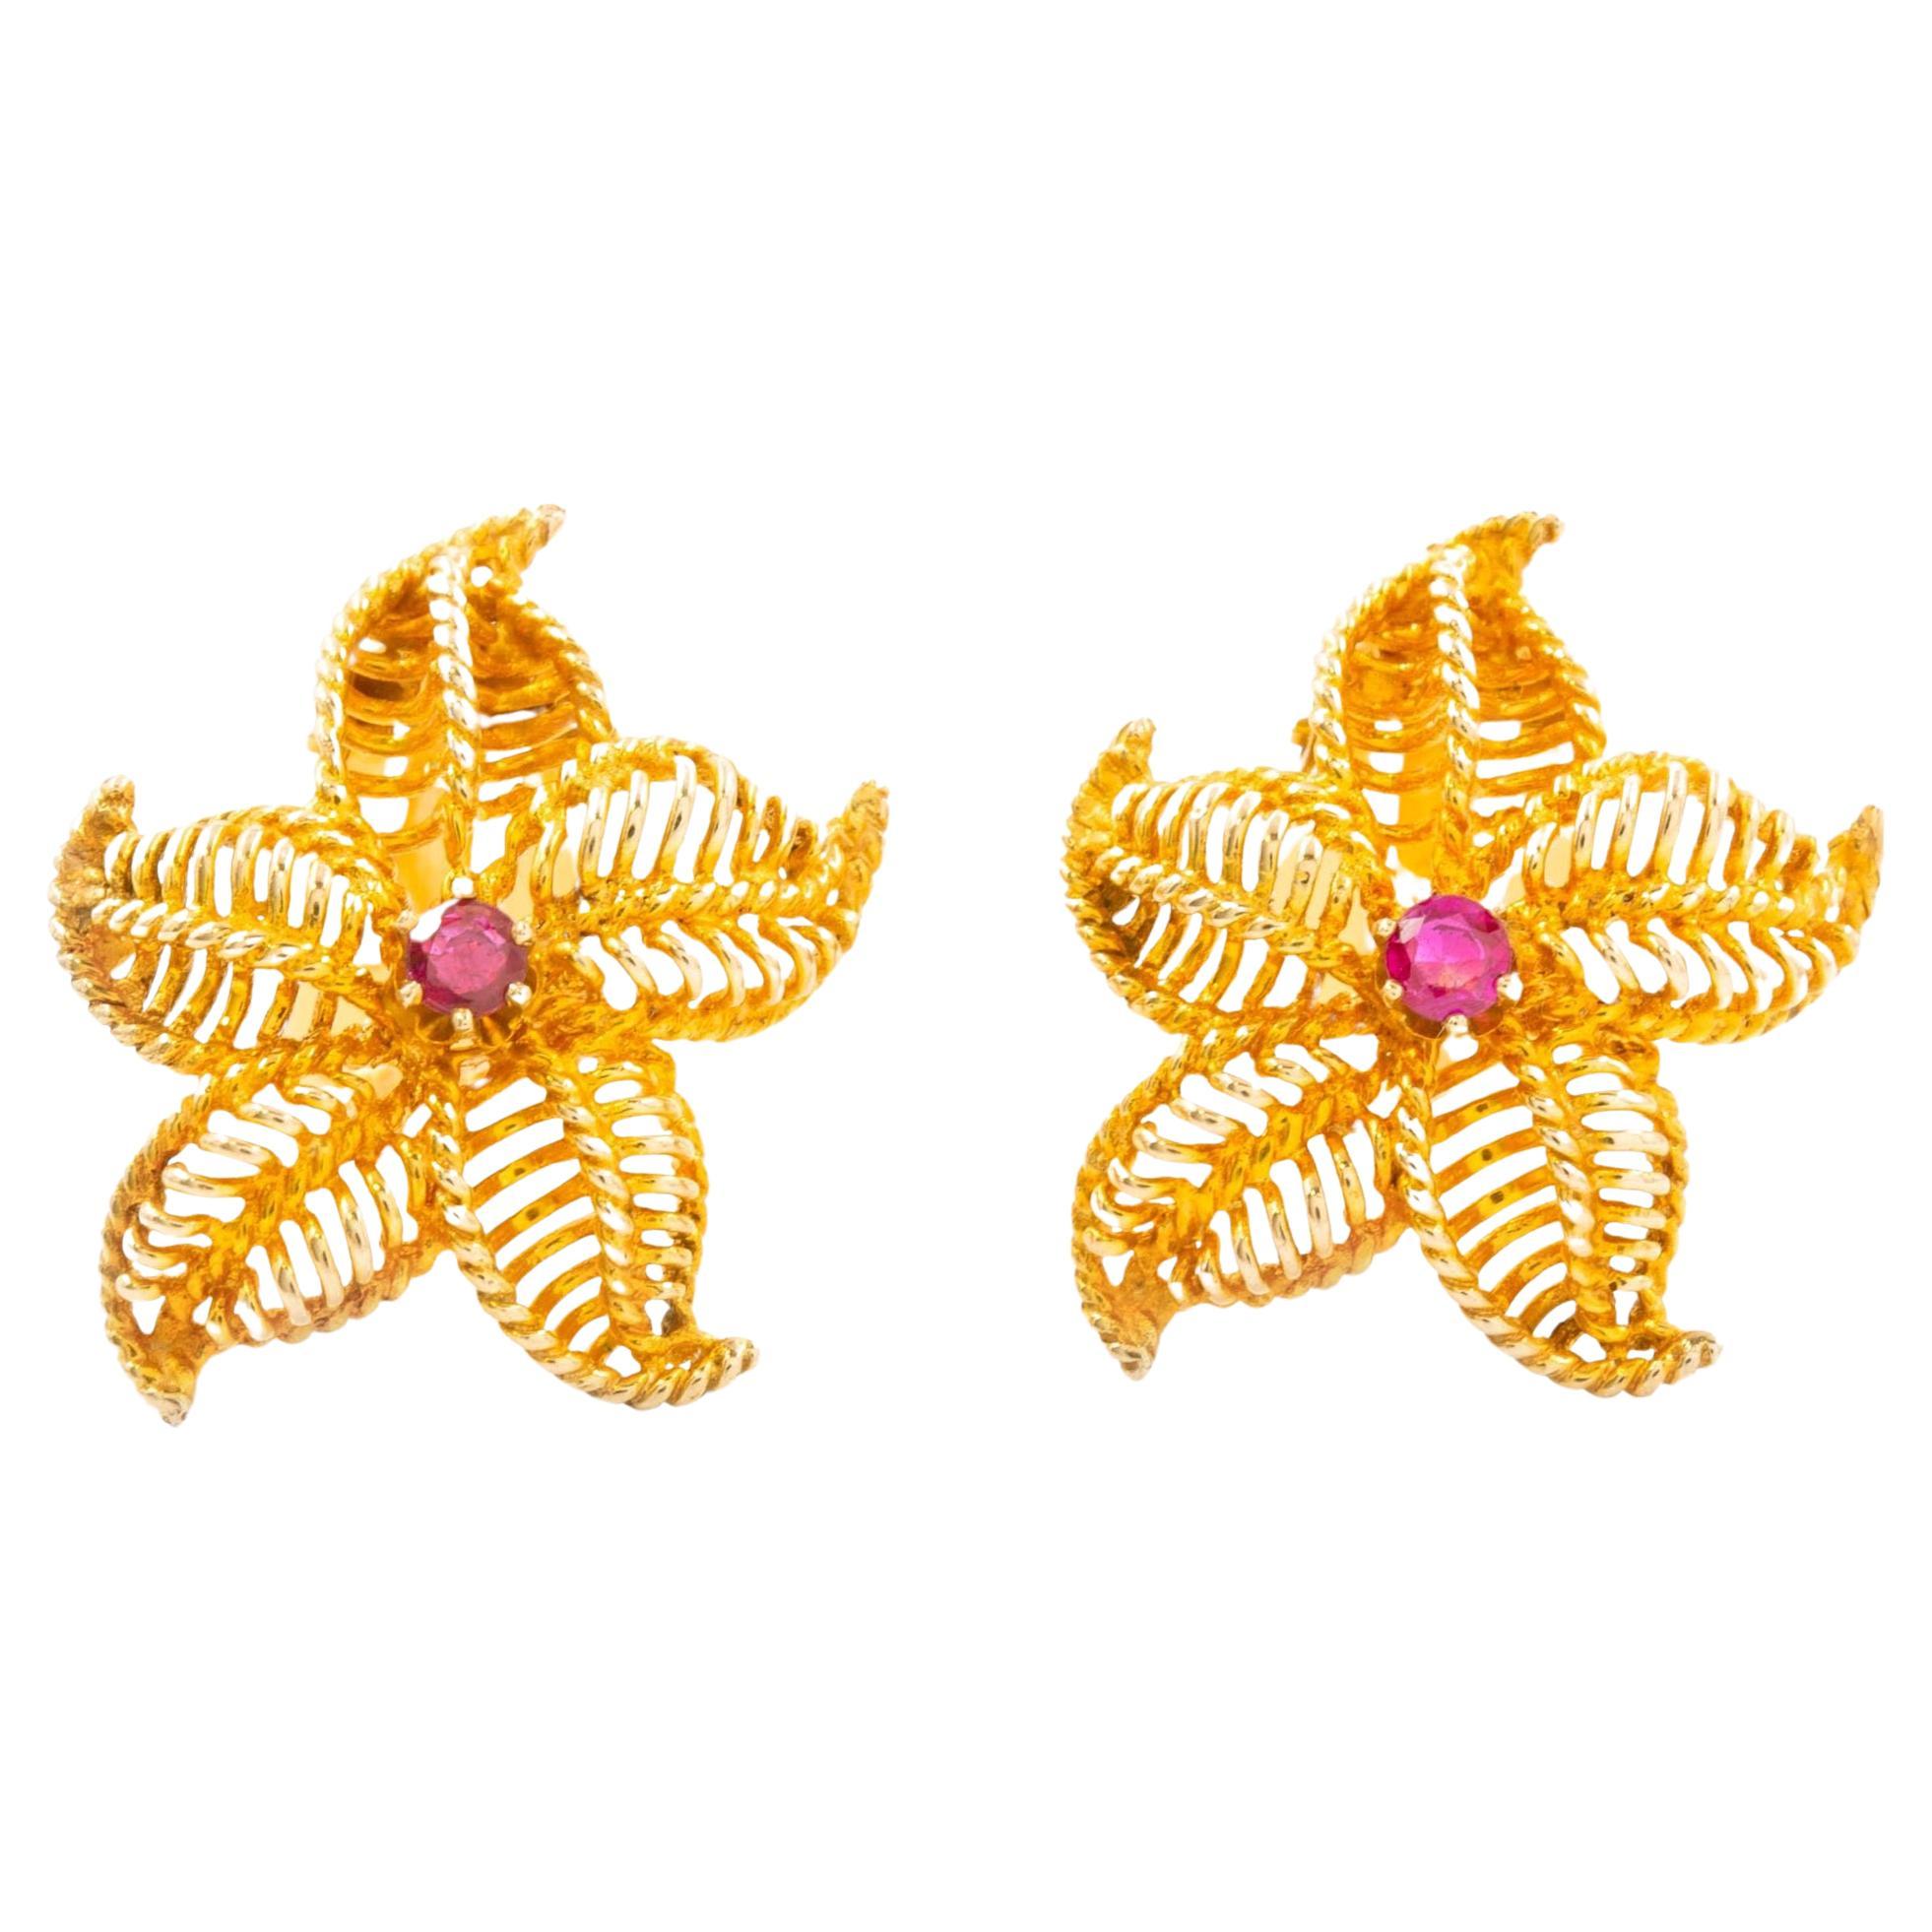 Pair of 14K Yellow Gold & Gemstone Starfish Earrings For Sale